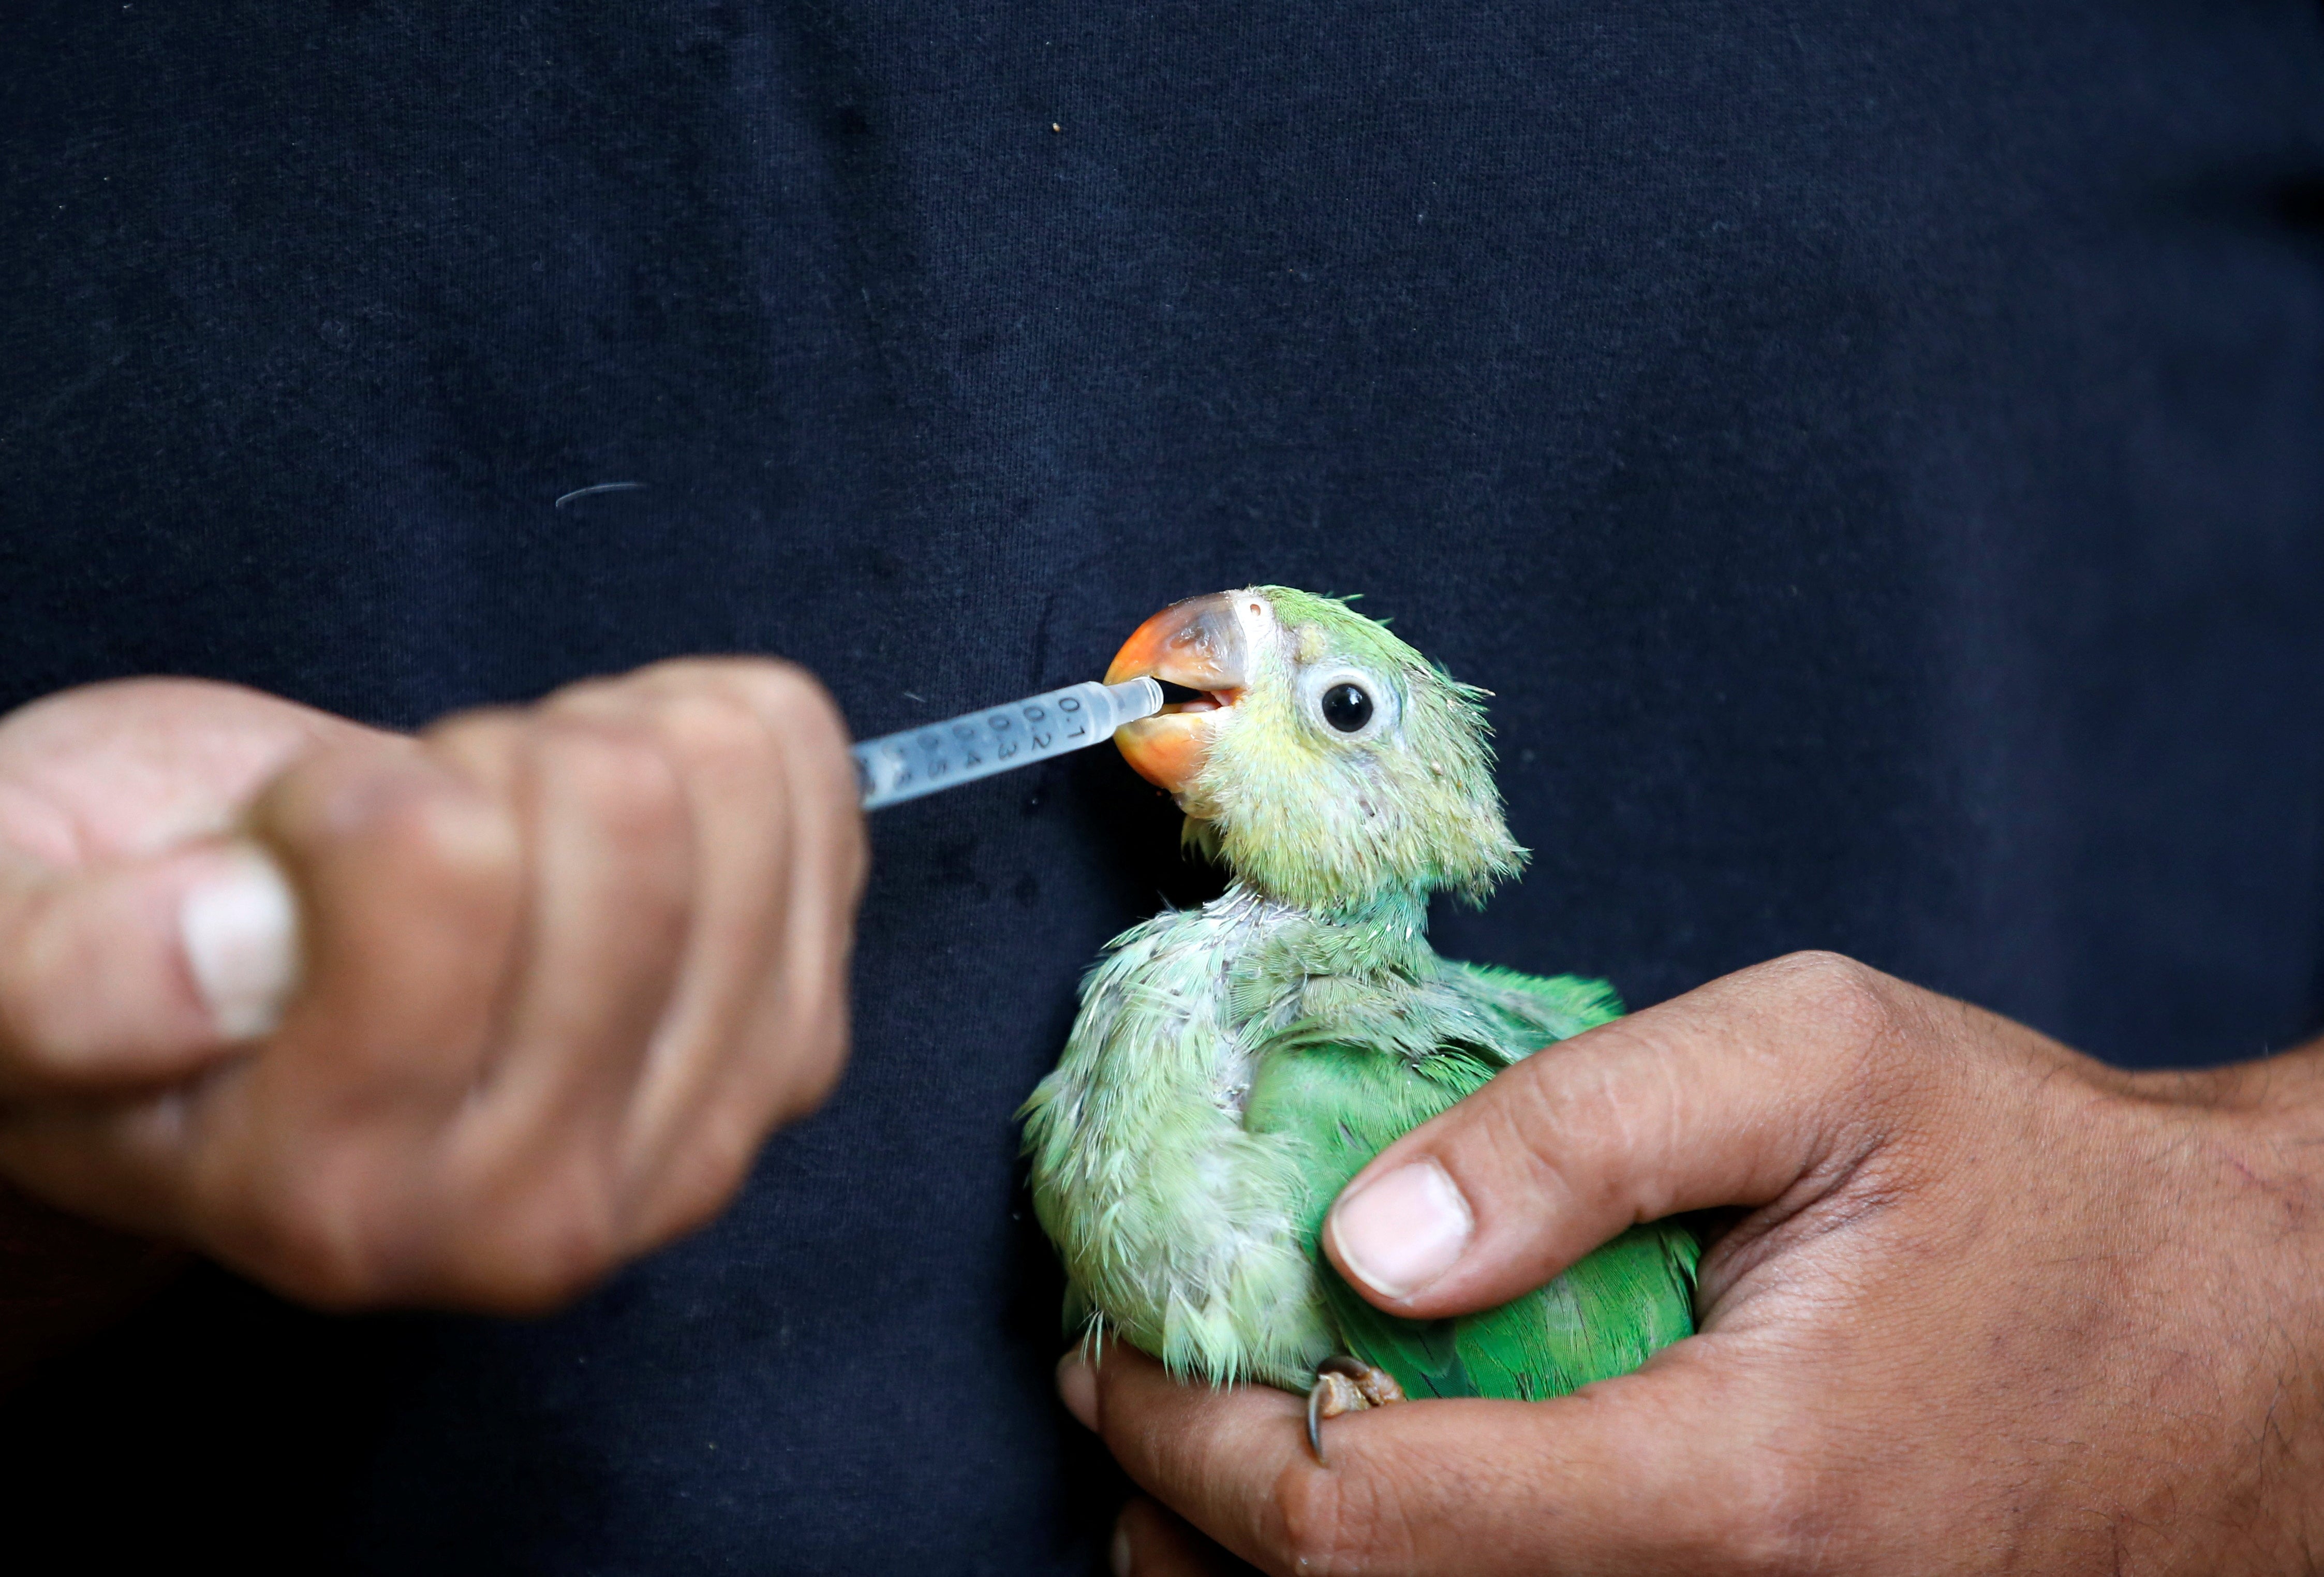 A caretaker in Ahmedabad feeds multivitamin mixed with water to a parakeet after it was found dehydrated due to heatwave